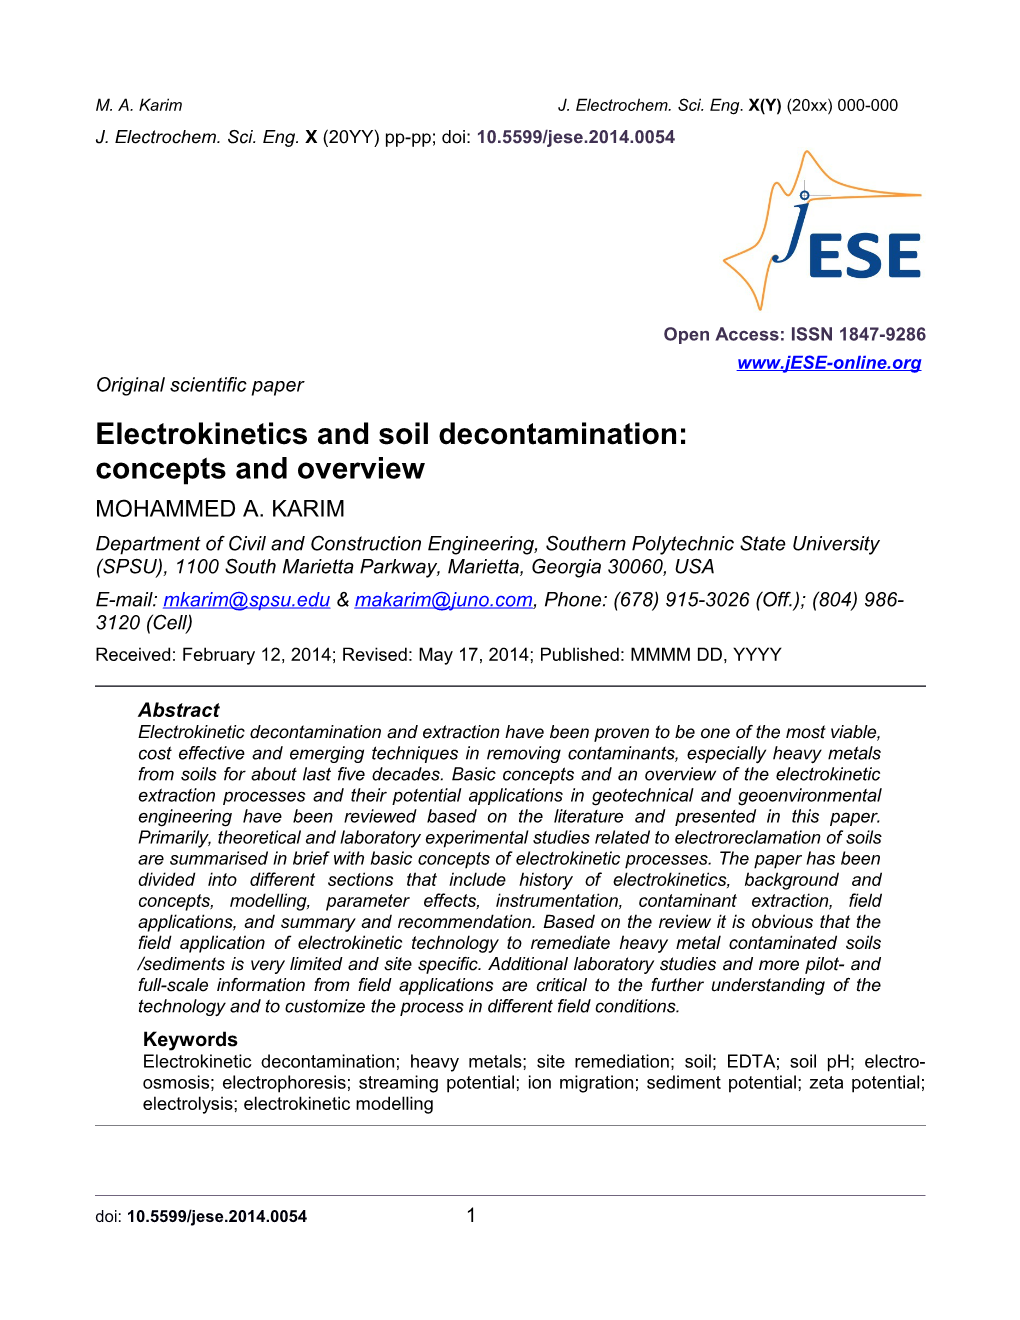 Electrokinetics and Soil Decontamination: Concepts and Overview